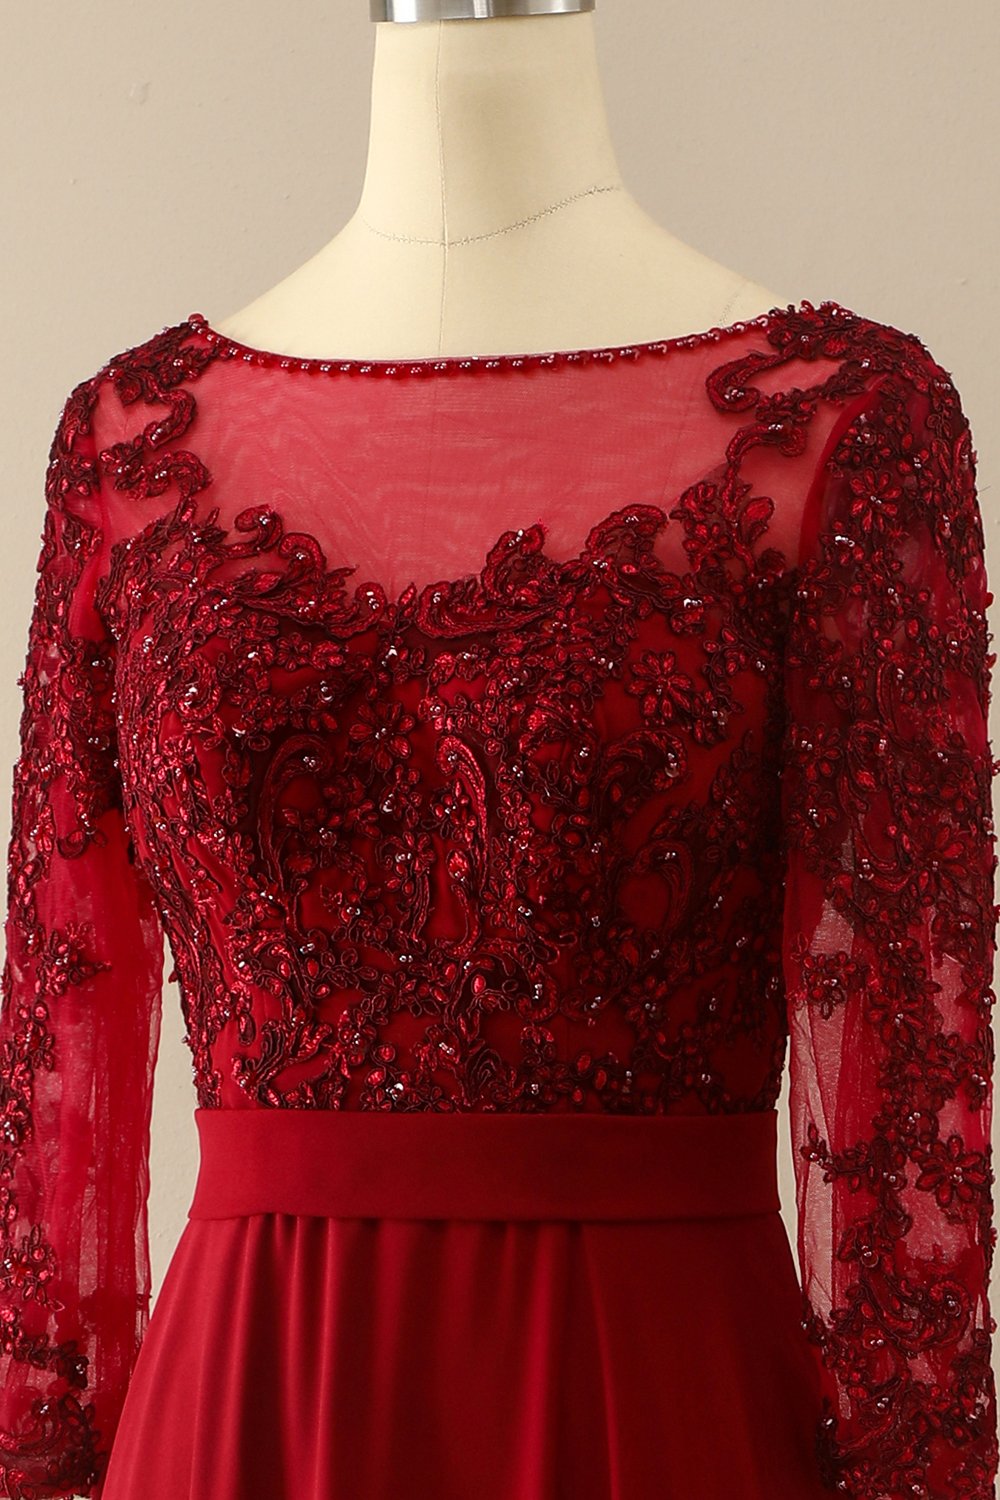 Burgundy Mother of the Bride Dress With Sleeves